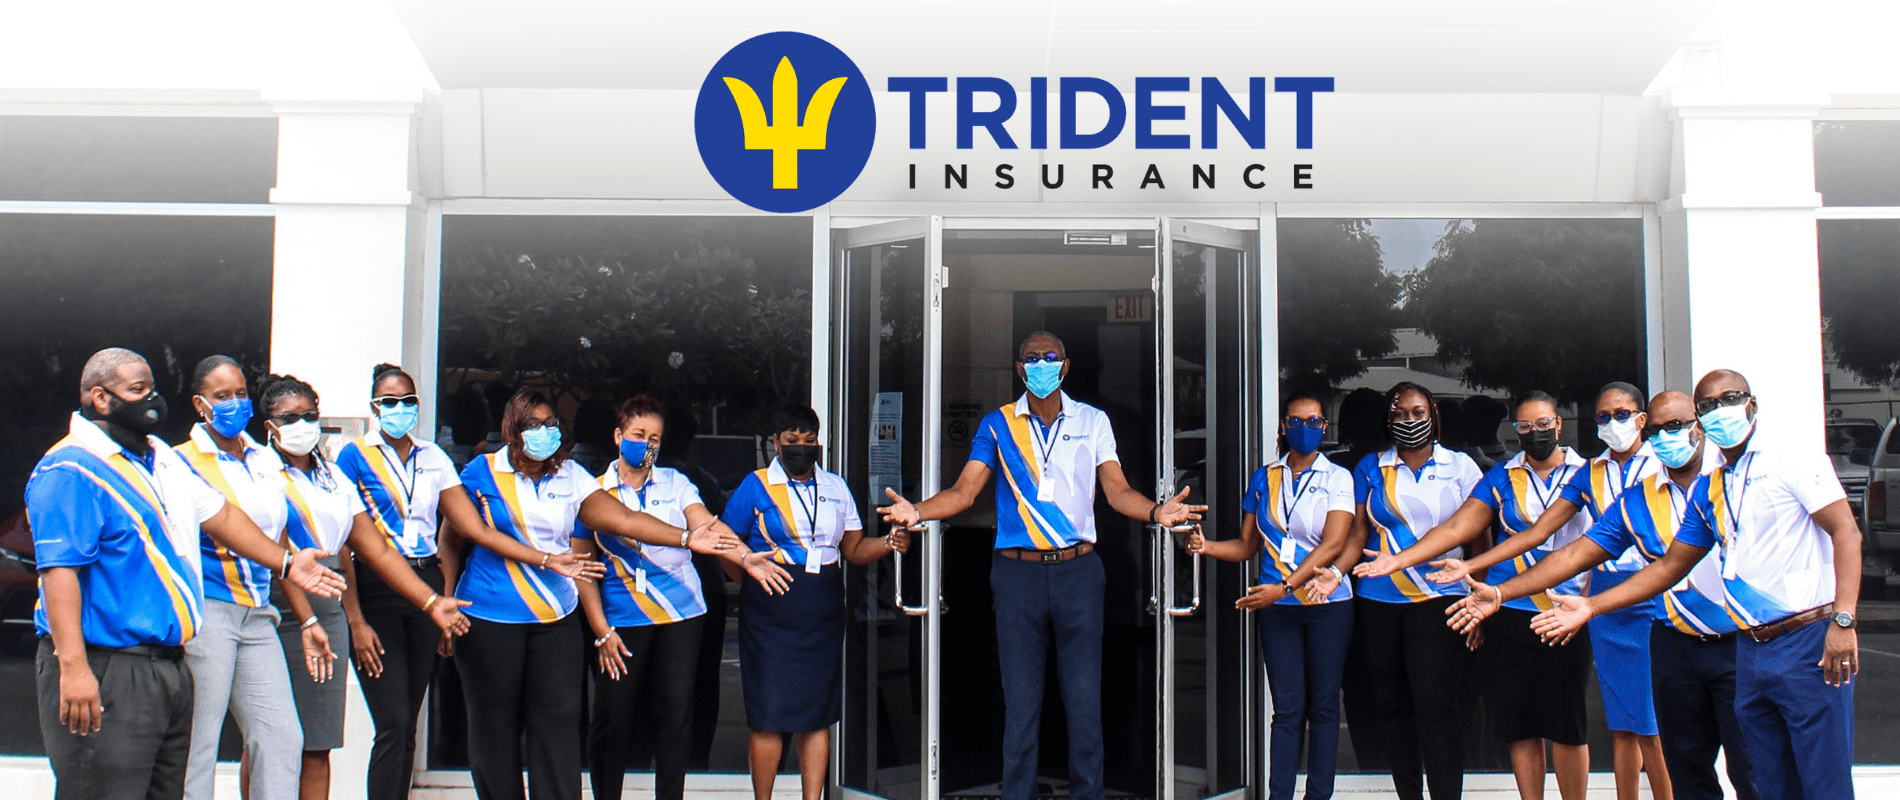 Trident Insurance Welcomes you